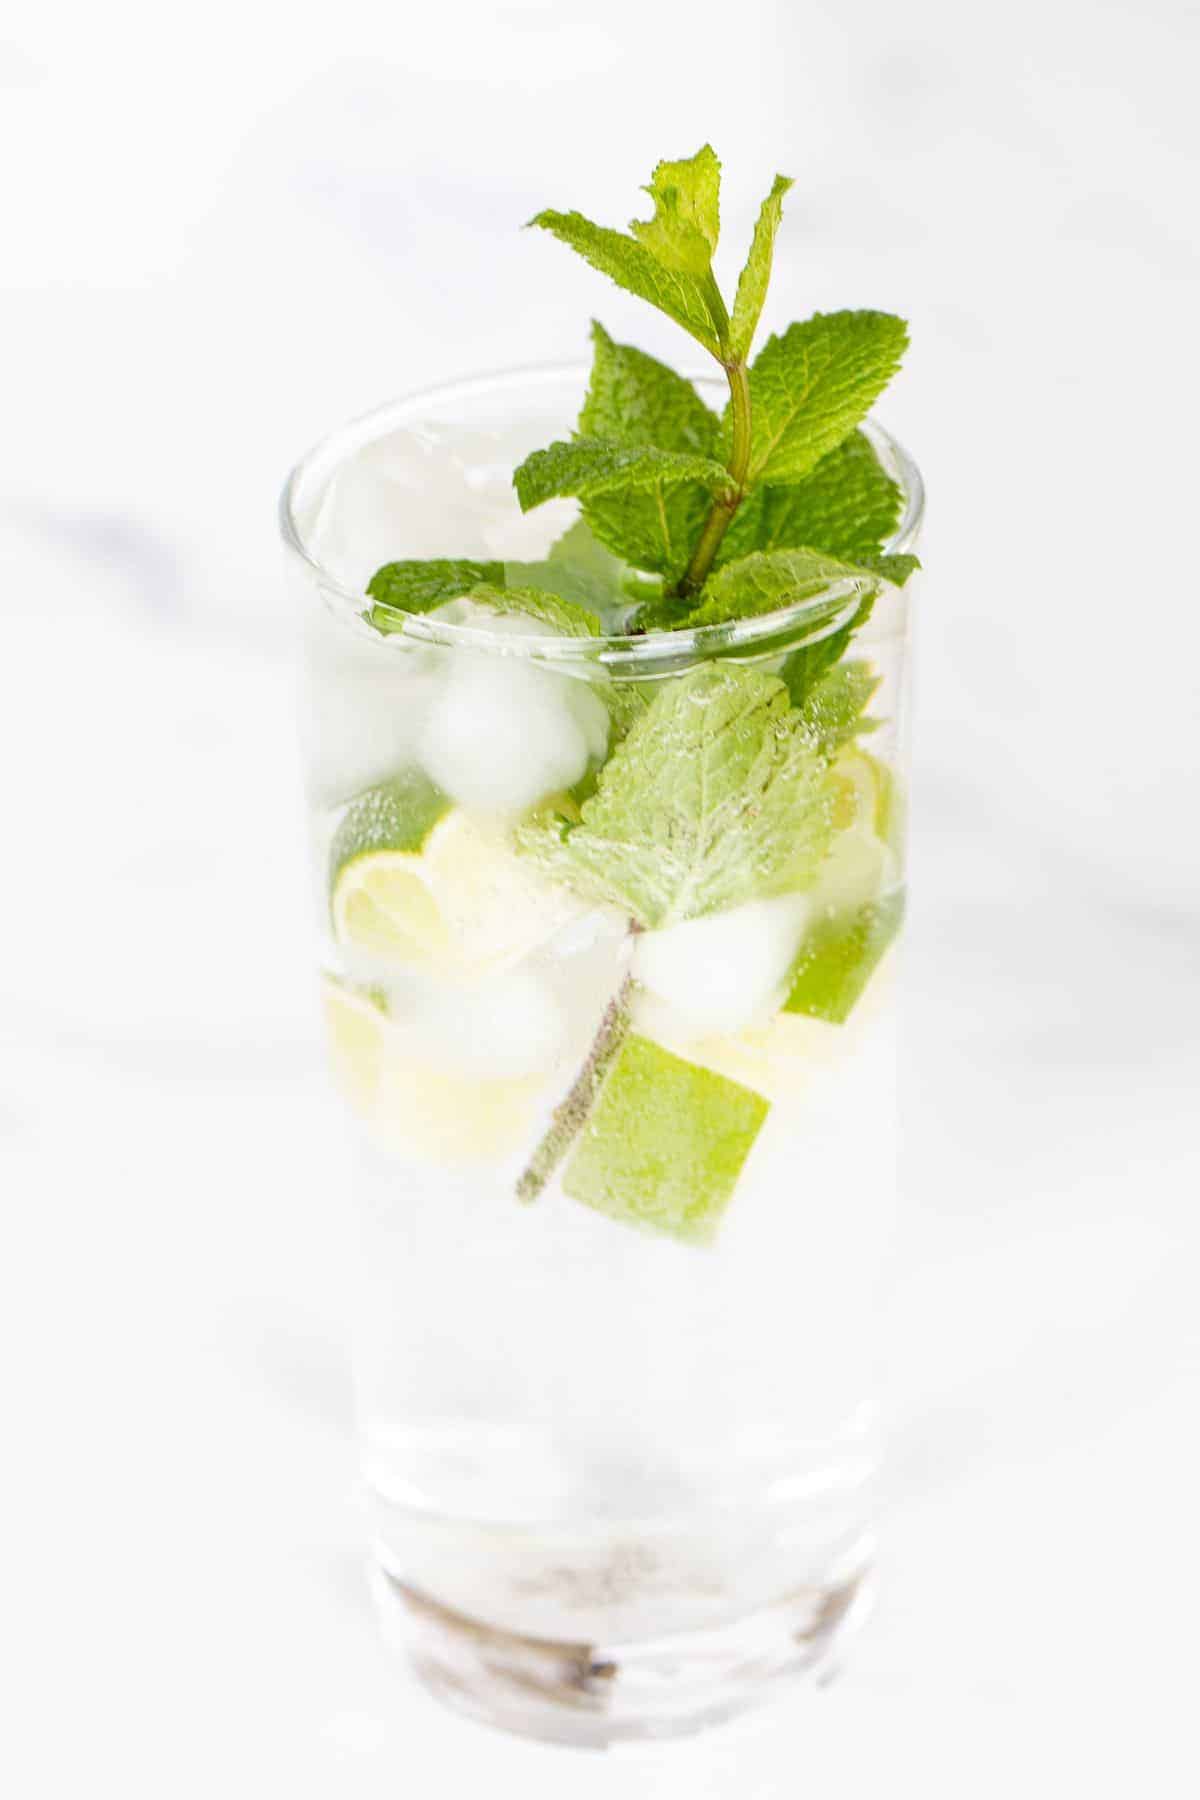 A clear glass full of a non alcoholic mojito recipe on a marble surface.